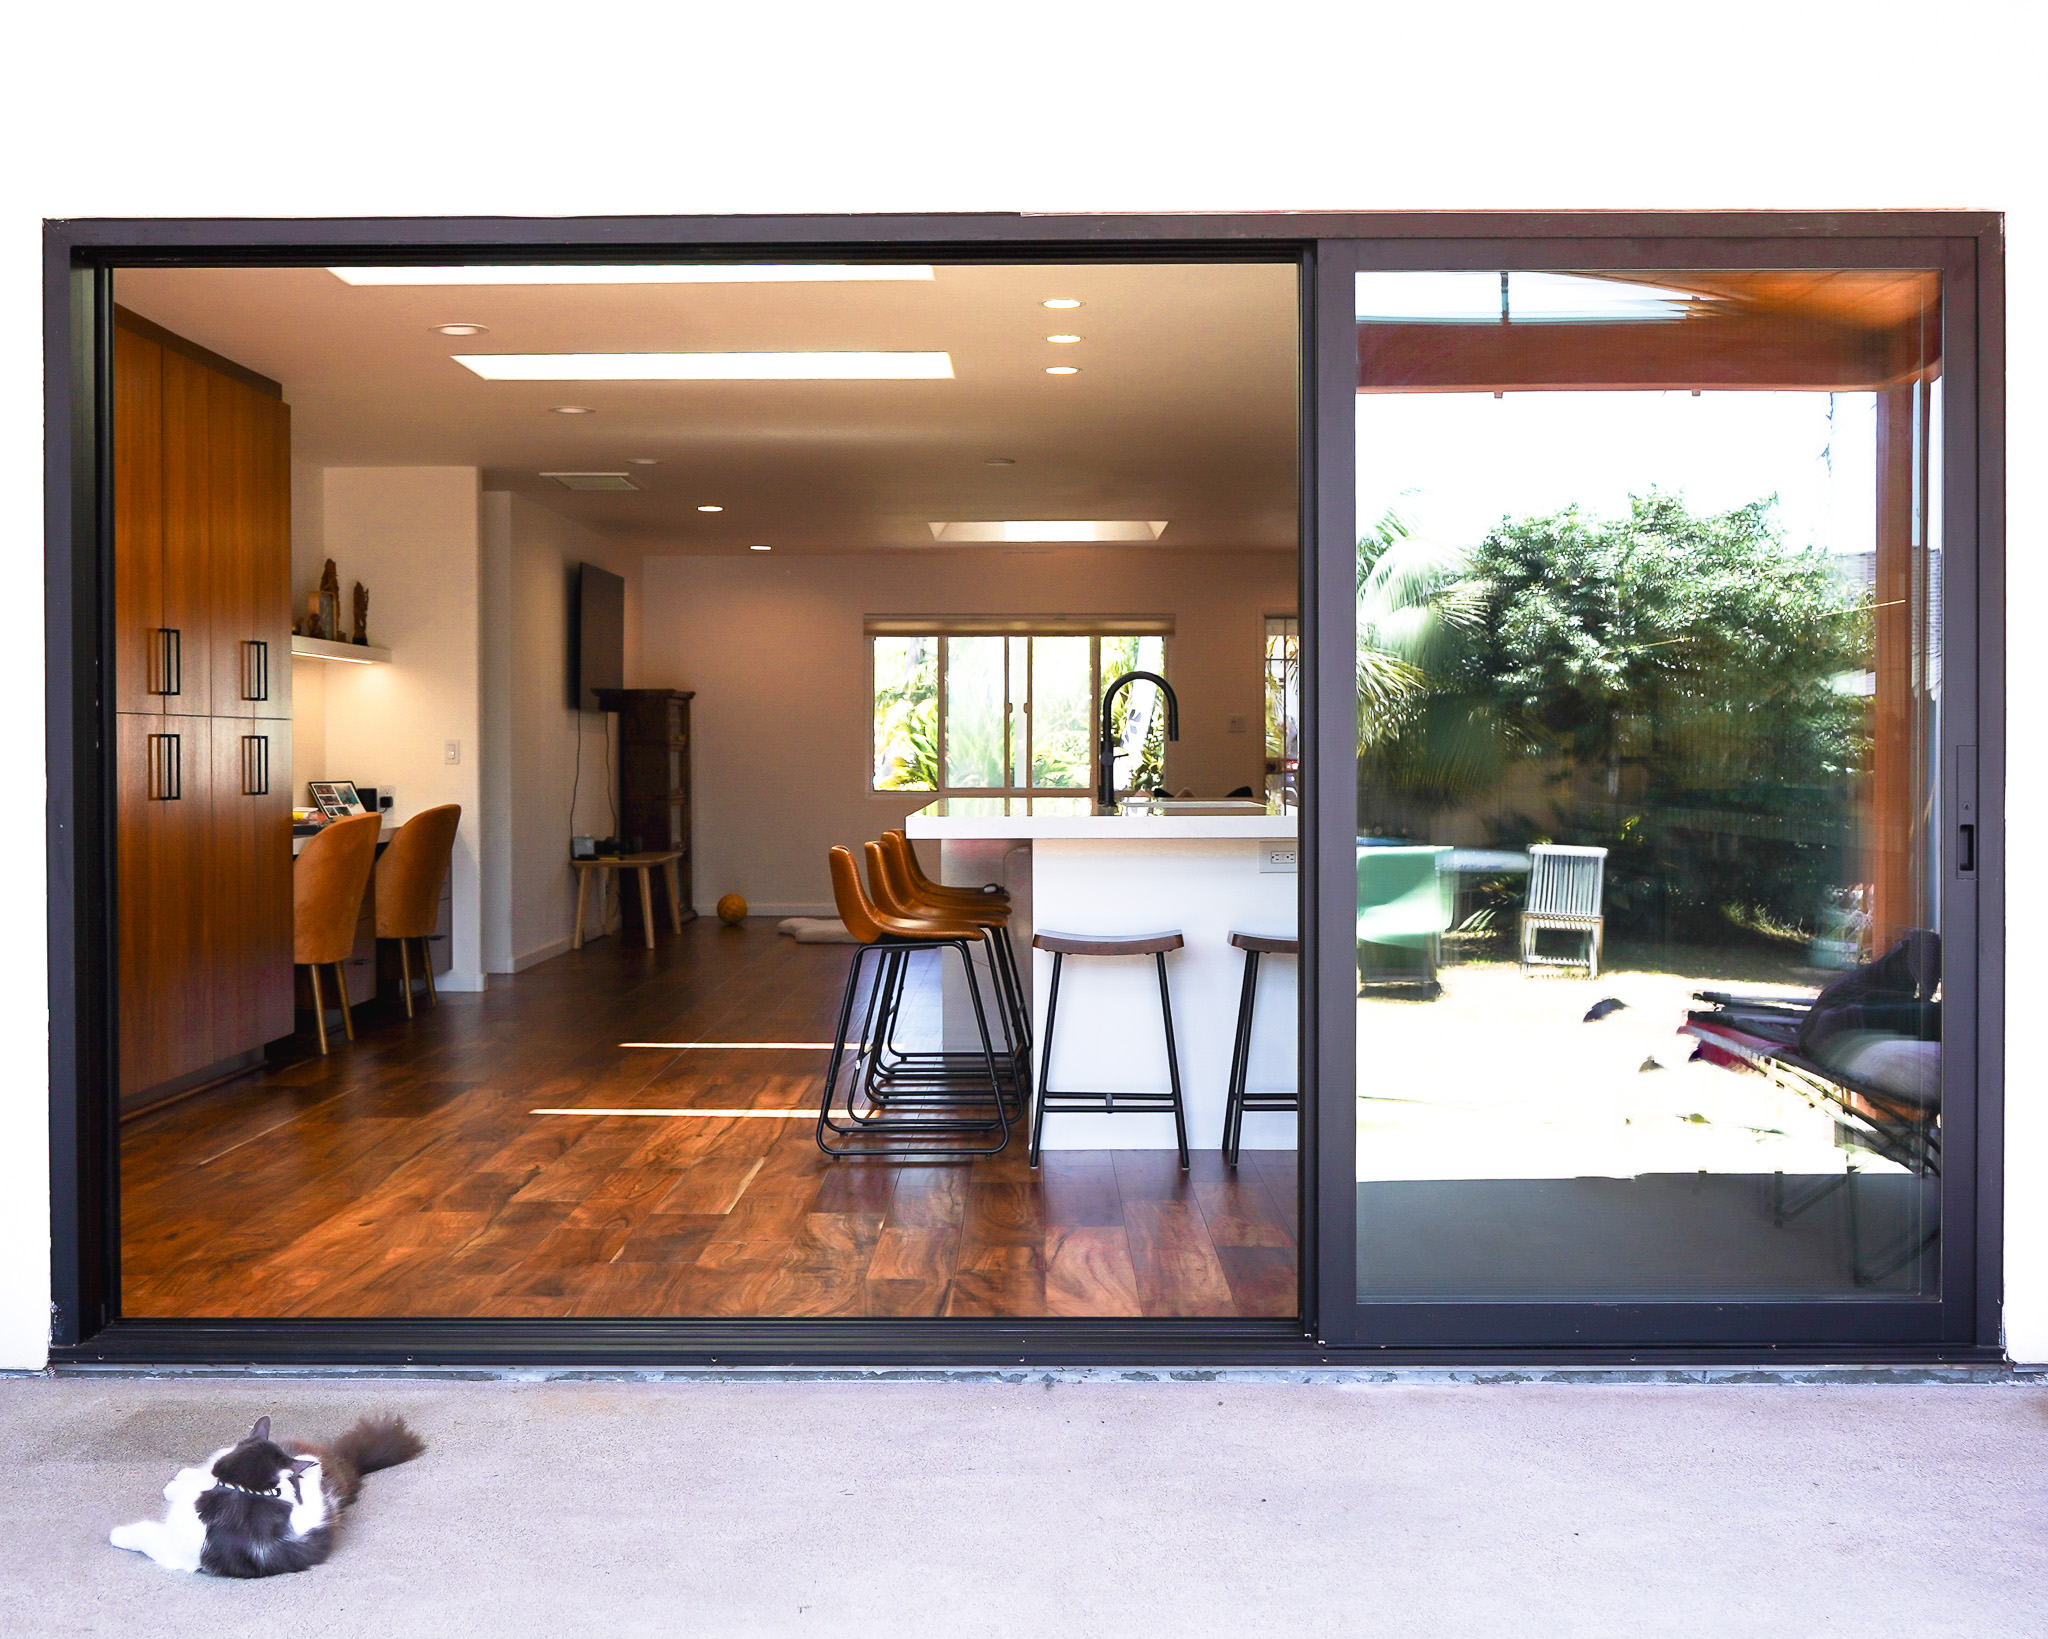 A contemporary kitchen viewed through a large open sliding glass door, with a cat lying on the ground in the foreground.